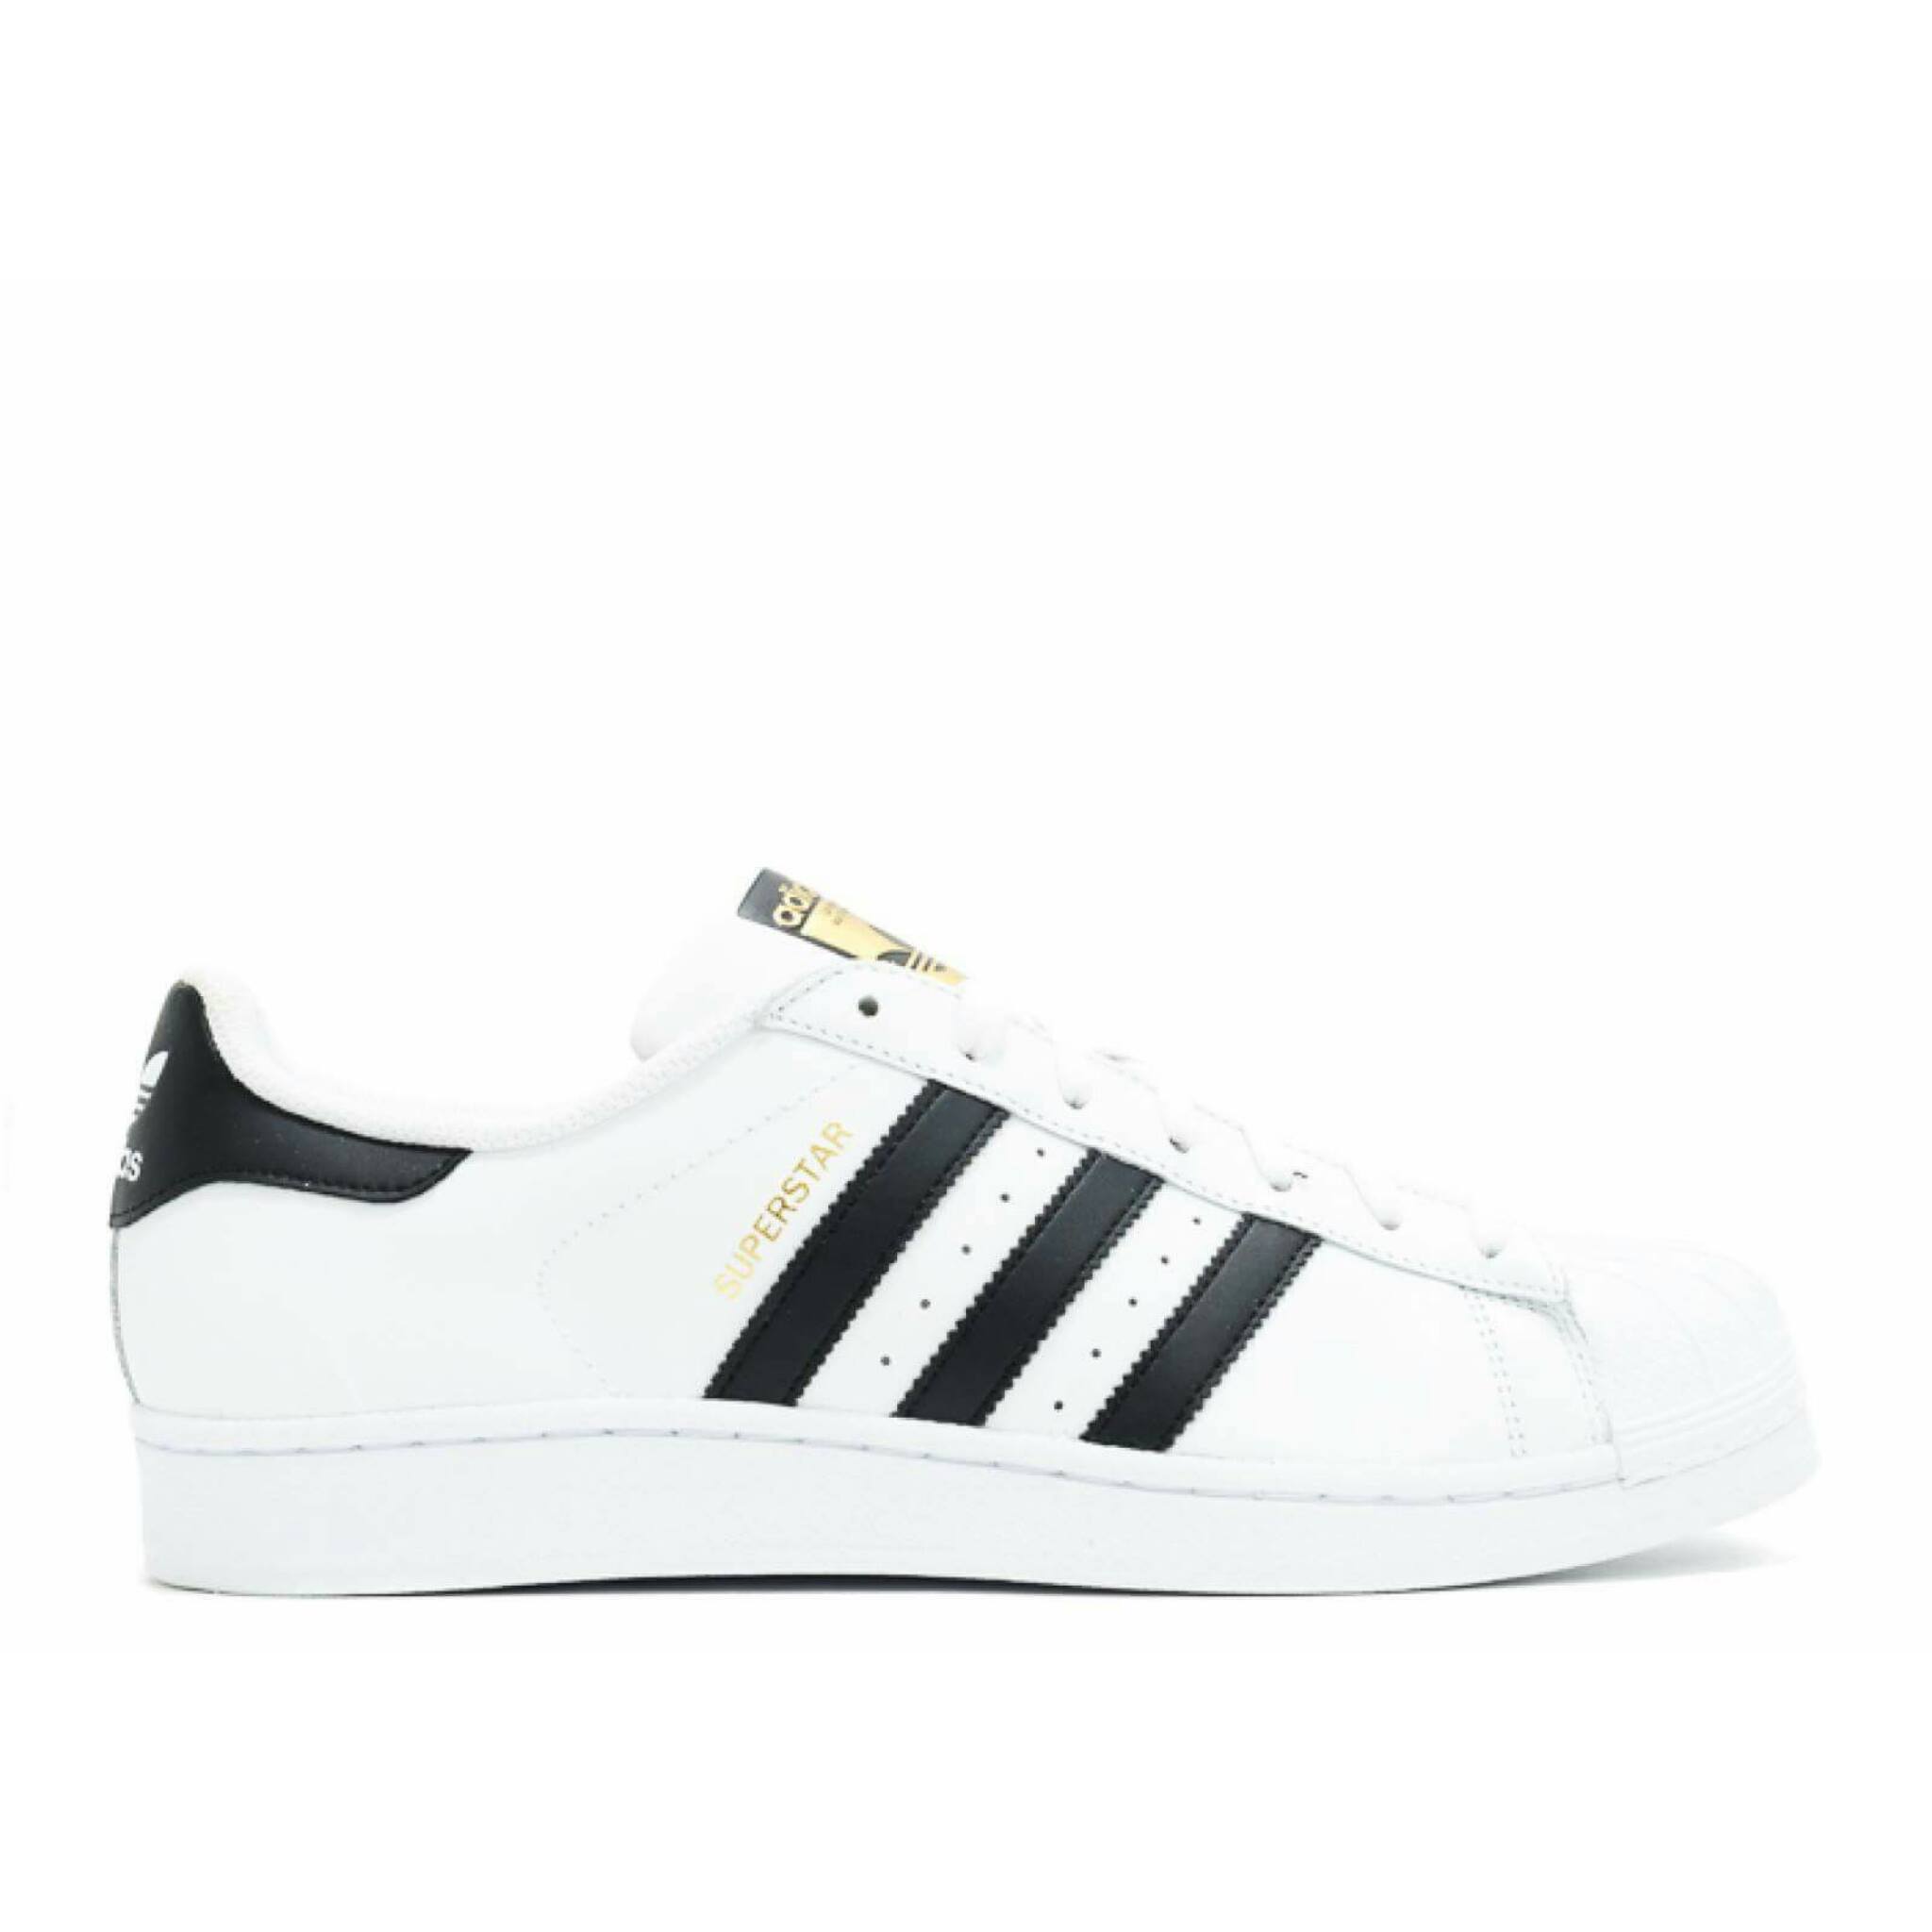 Buy Adidas Shoes Superstar Earth Camo For Men Prices In Pakistan | 20% ...